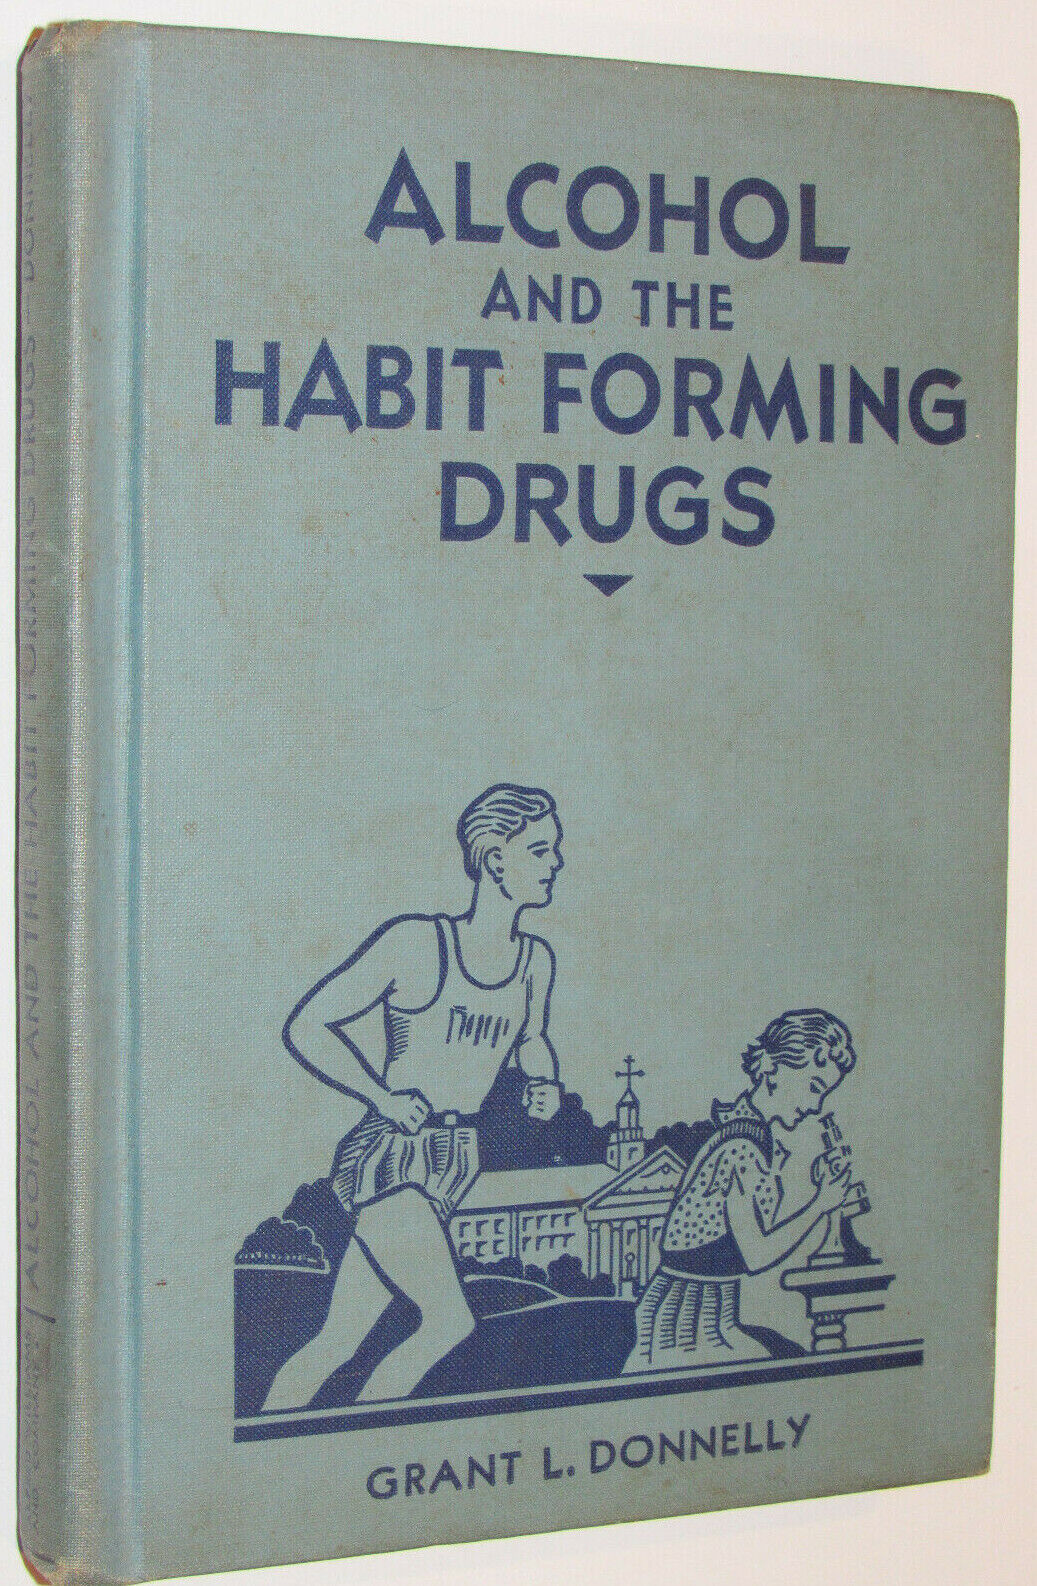 VTG 1936 BOOK 'ALCOHOL & THE HABIT FORMING DRUGS' 1st ED NC SCHOOL TEXTBOOK